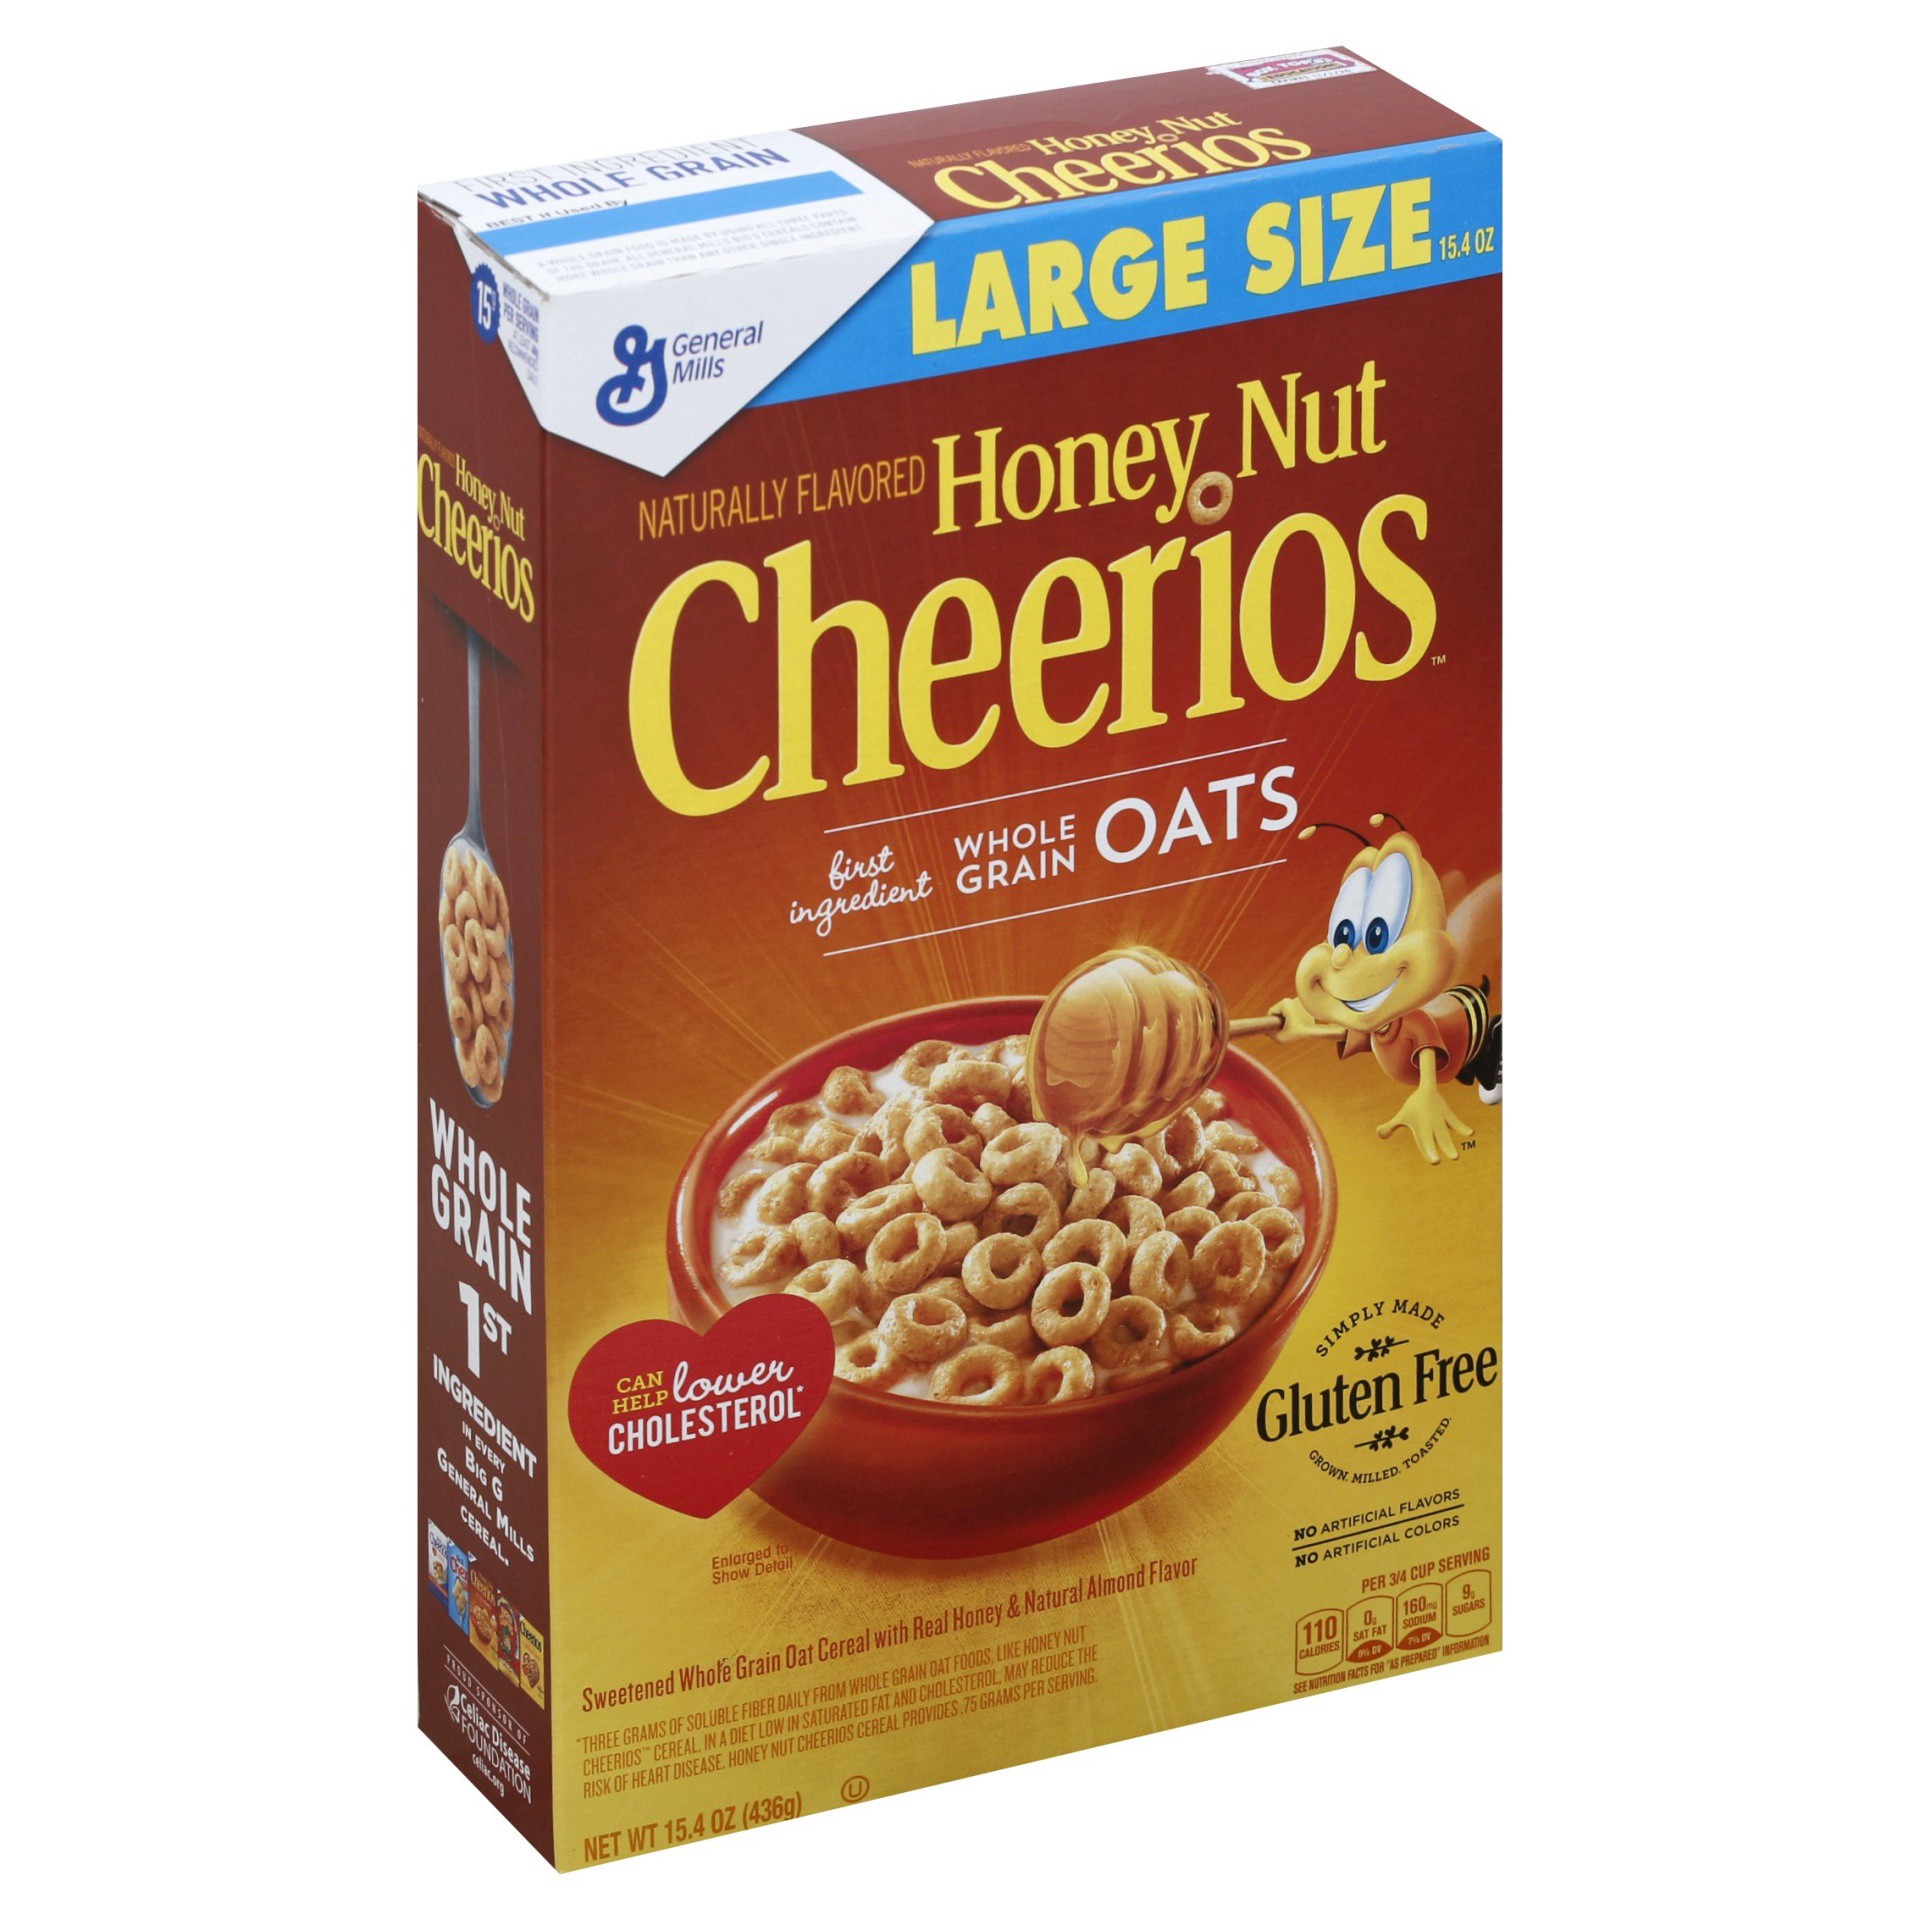 slide 1 of 4, Honey Nut Cheerios Heart Healthy Cereal, 15.4 OZ Large Size Box, 15.4 oz